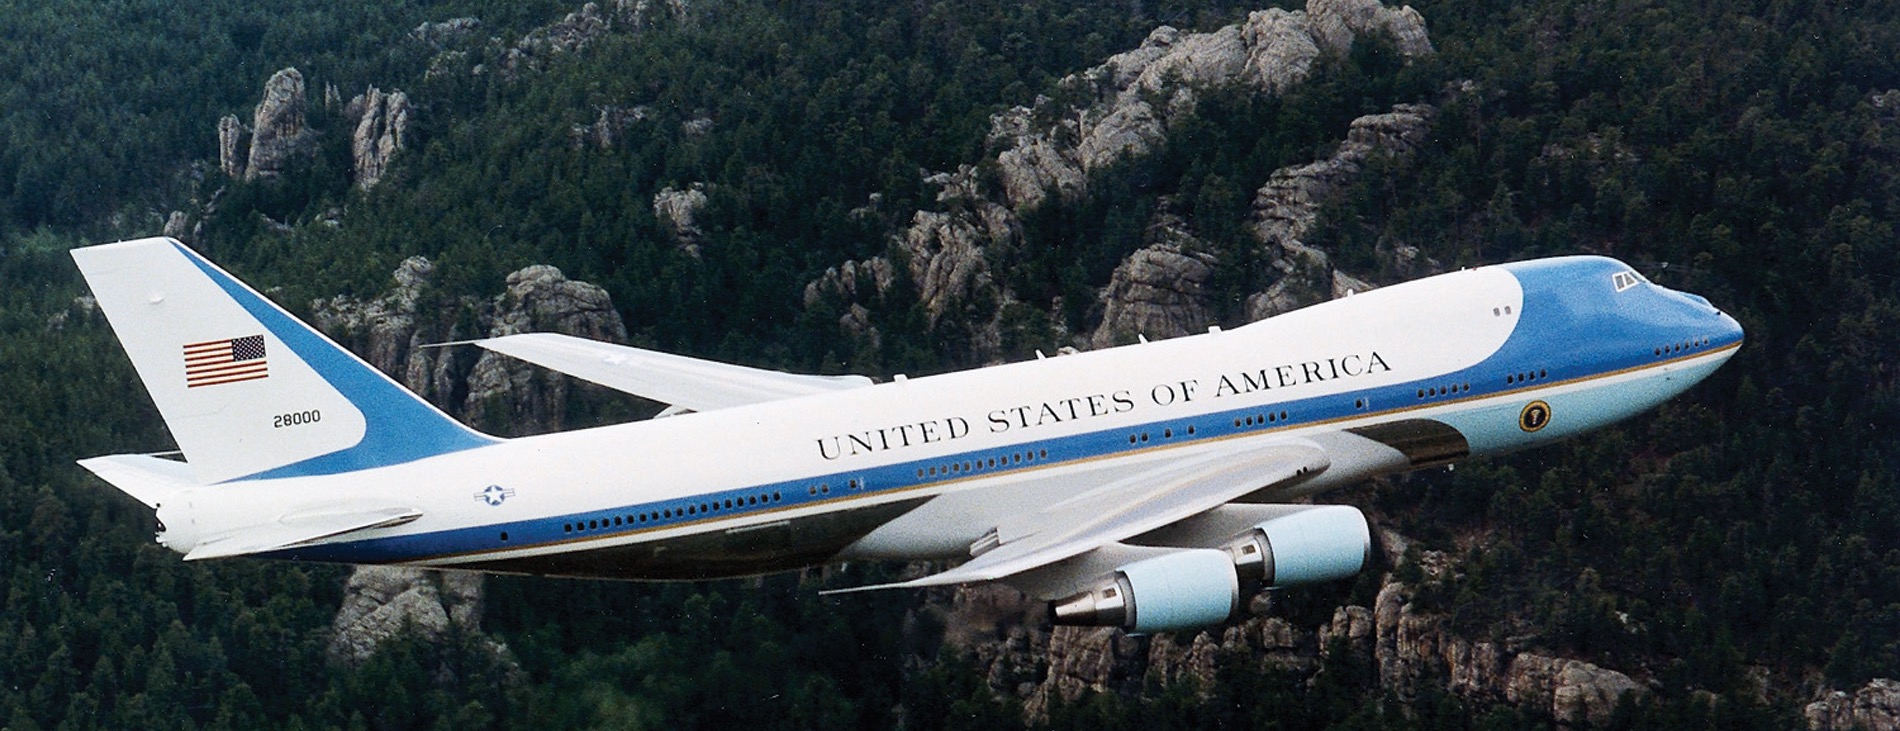 Air Force One Cost